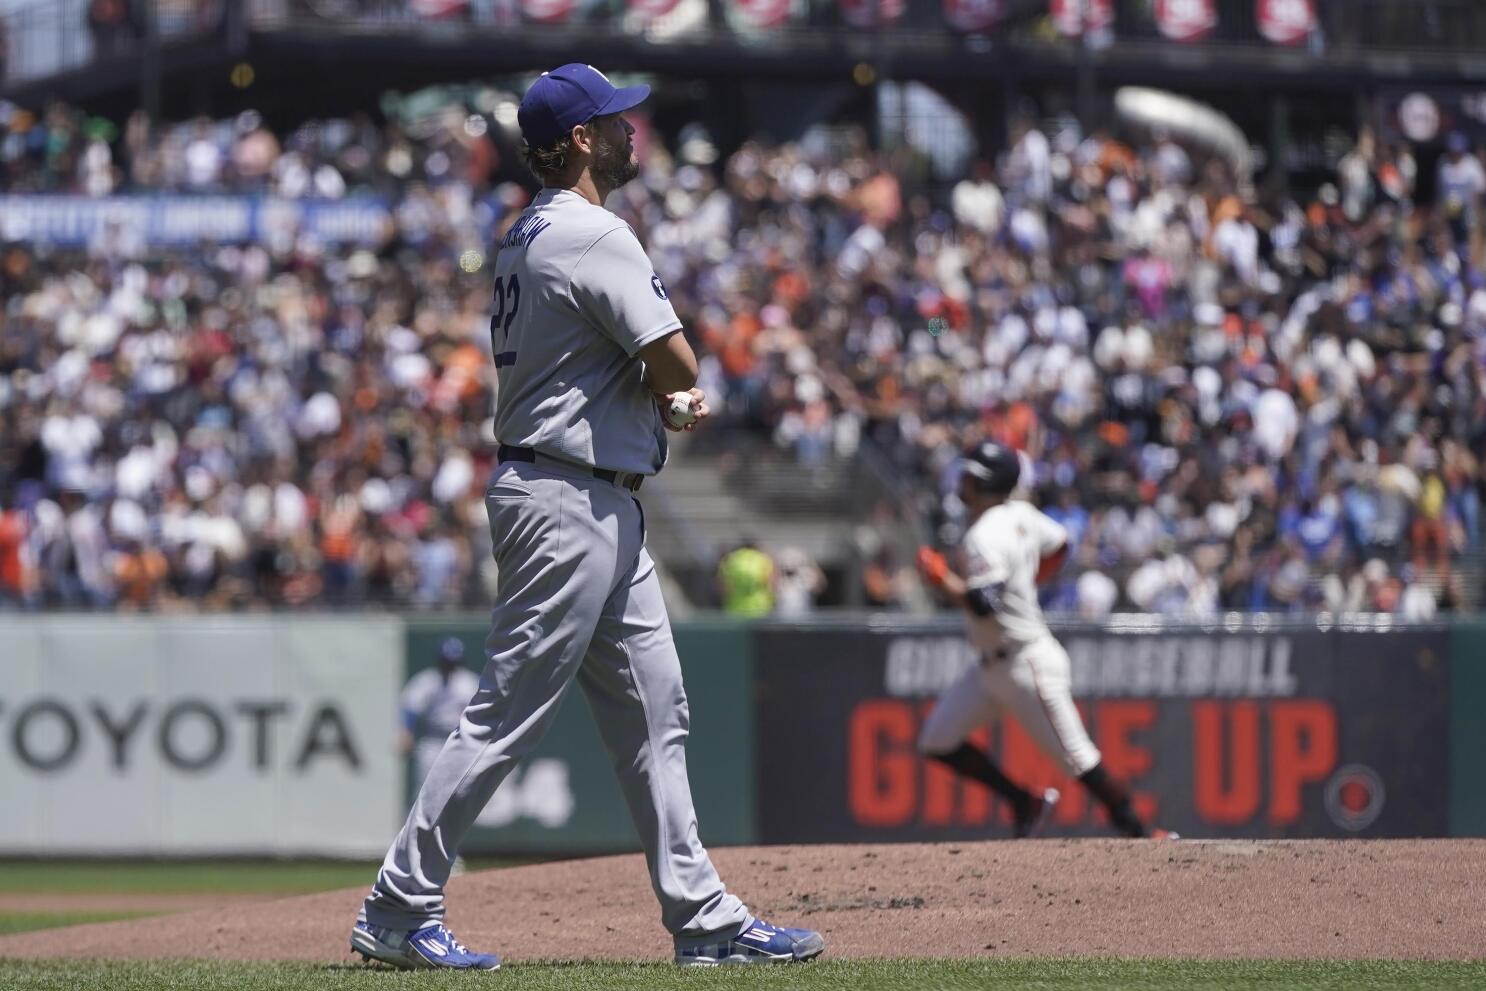 Kershaw leaves with back pain as Dodgers beat Giants 5-3